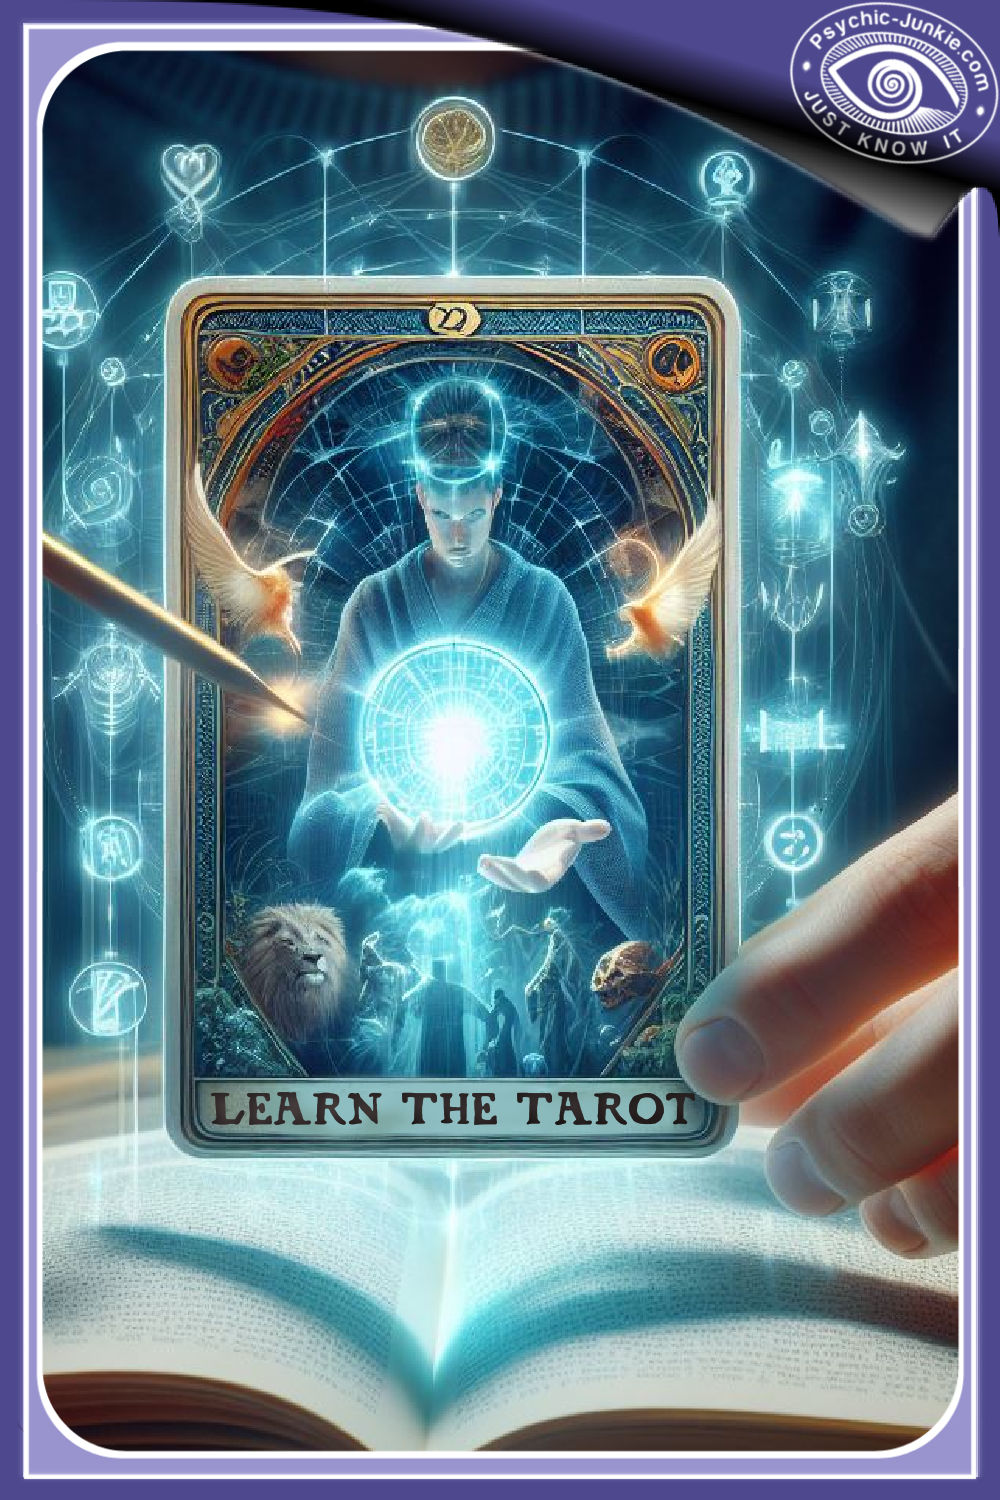 The Best Way To Learn Tarot